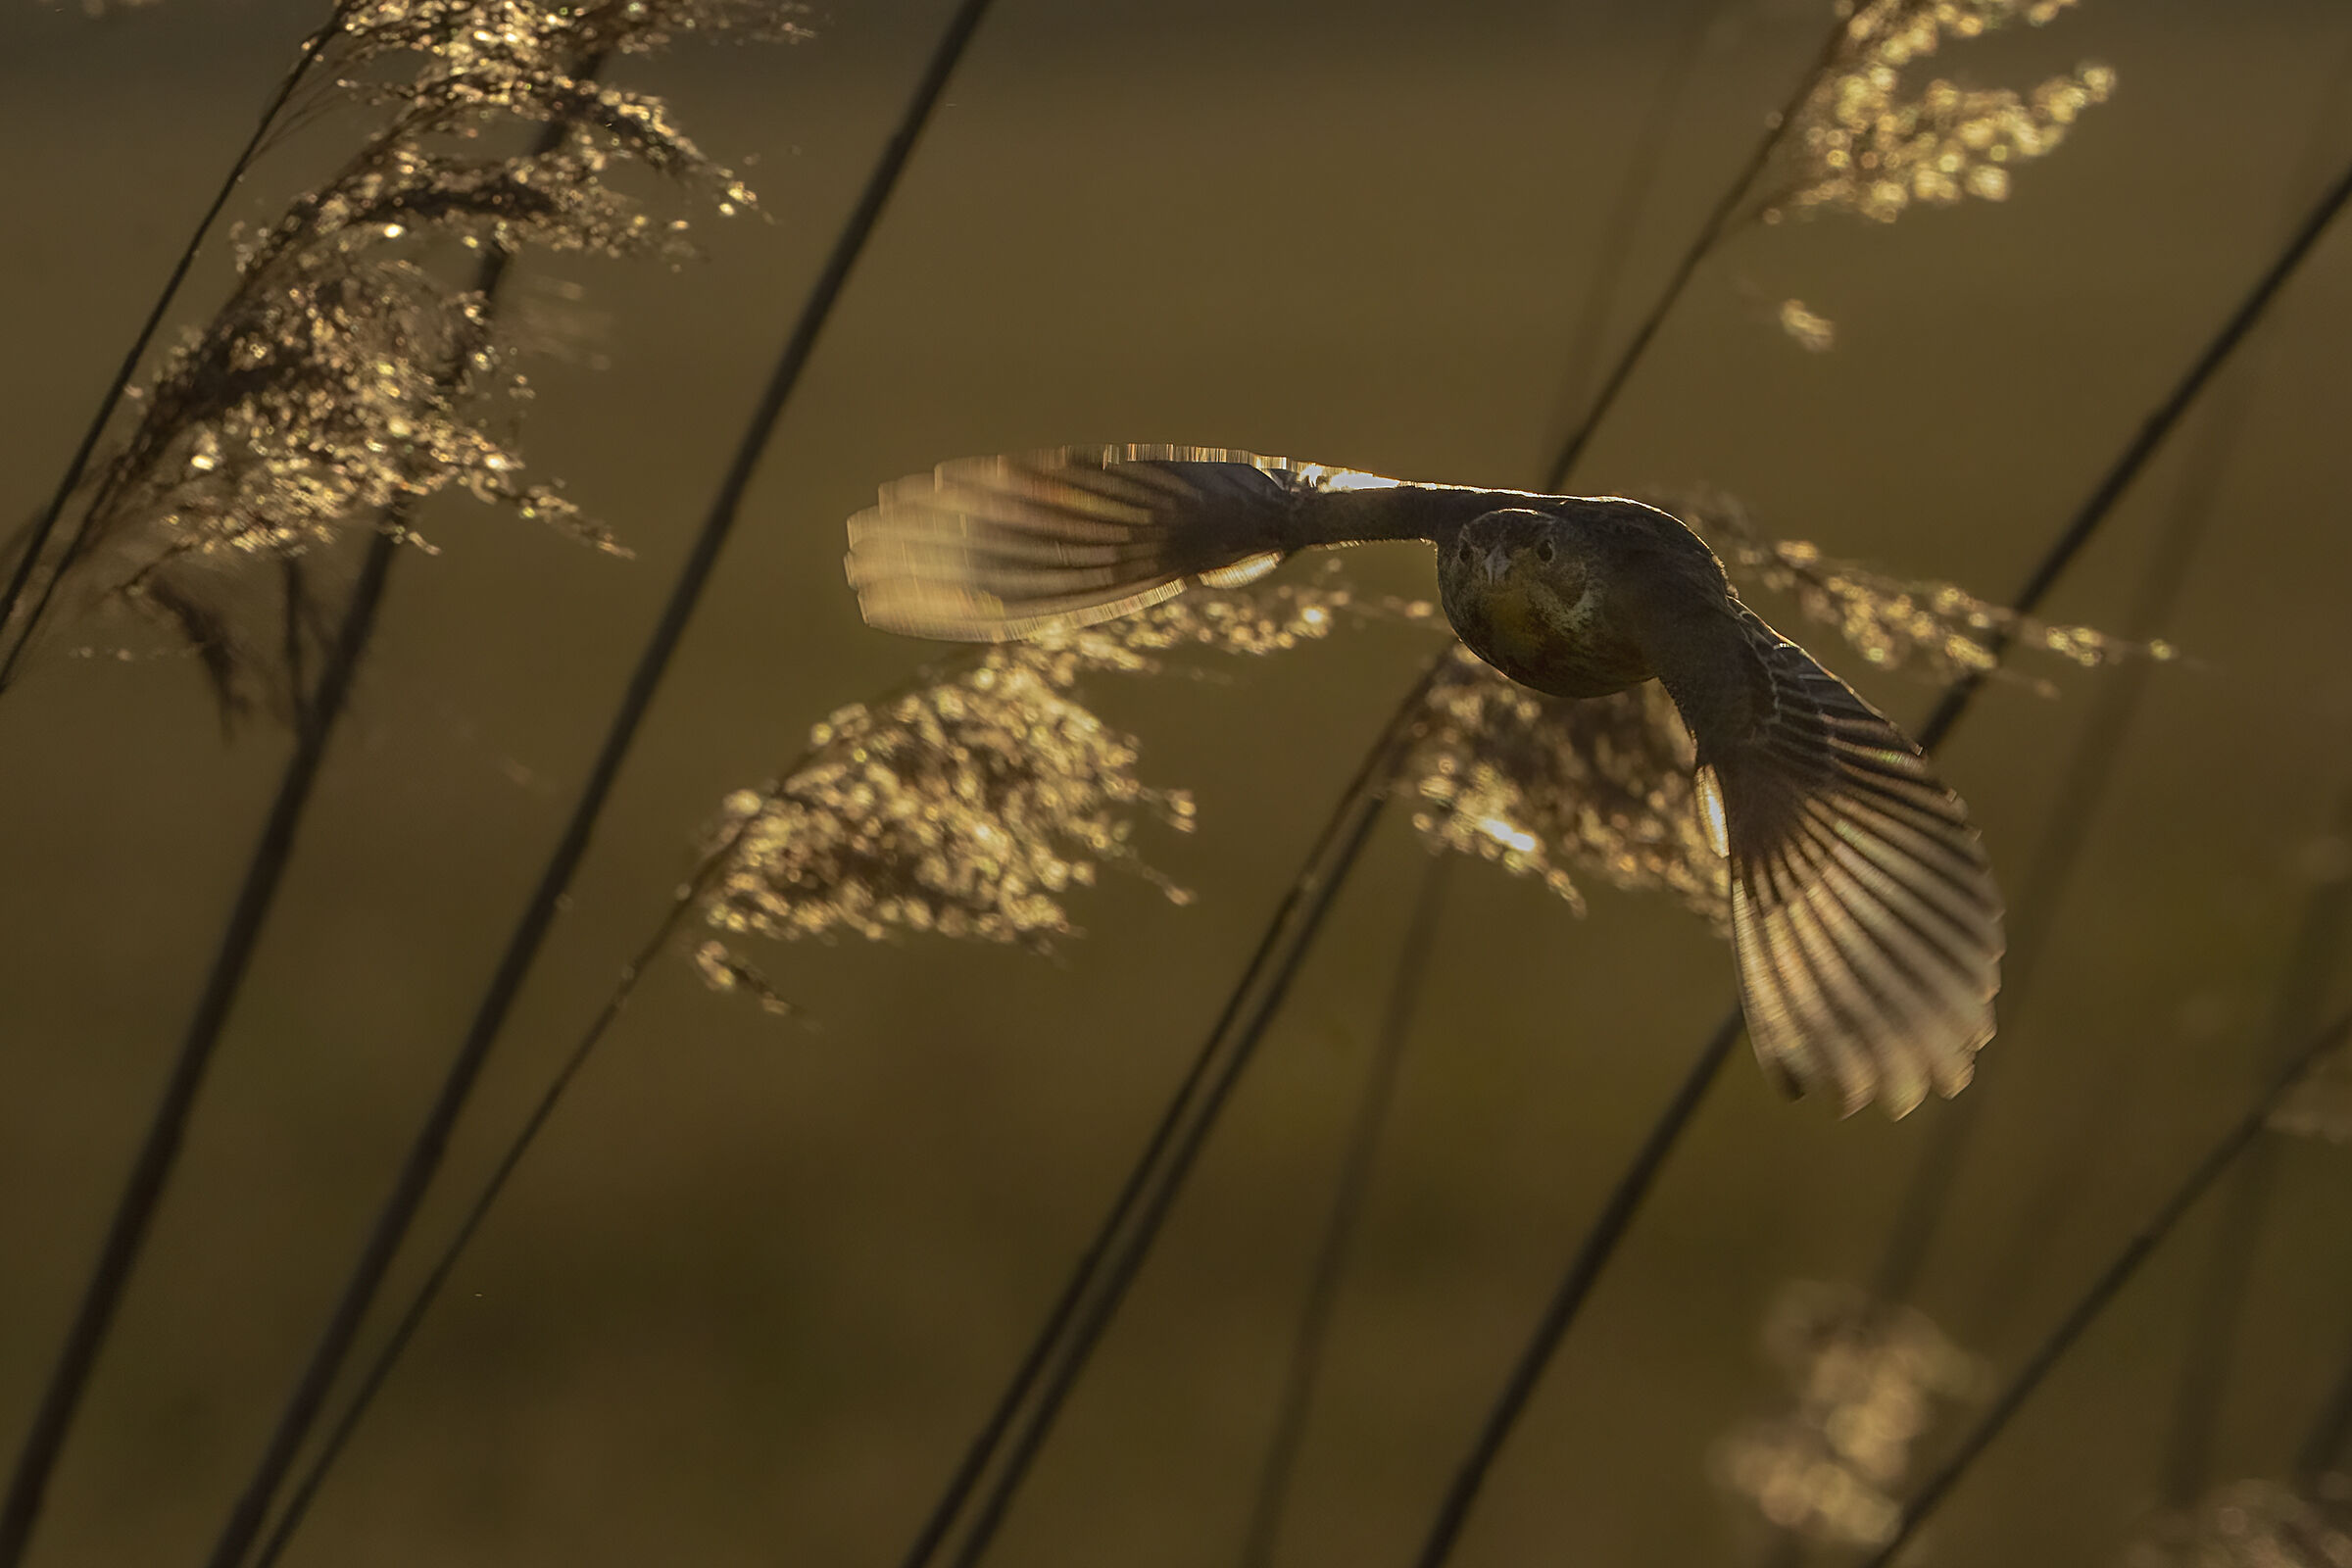 squealing in flight at sunset ...